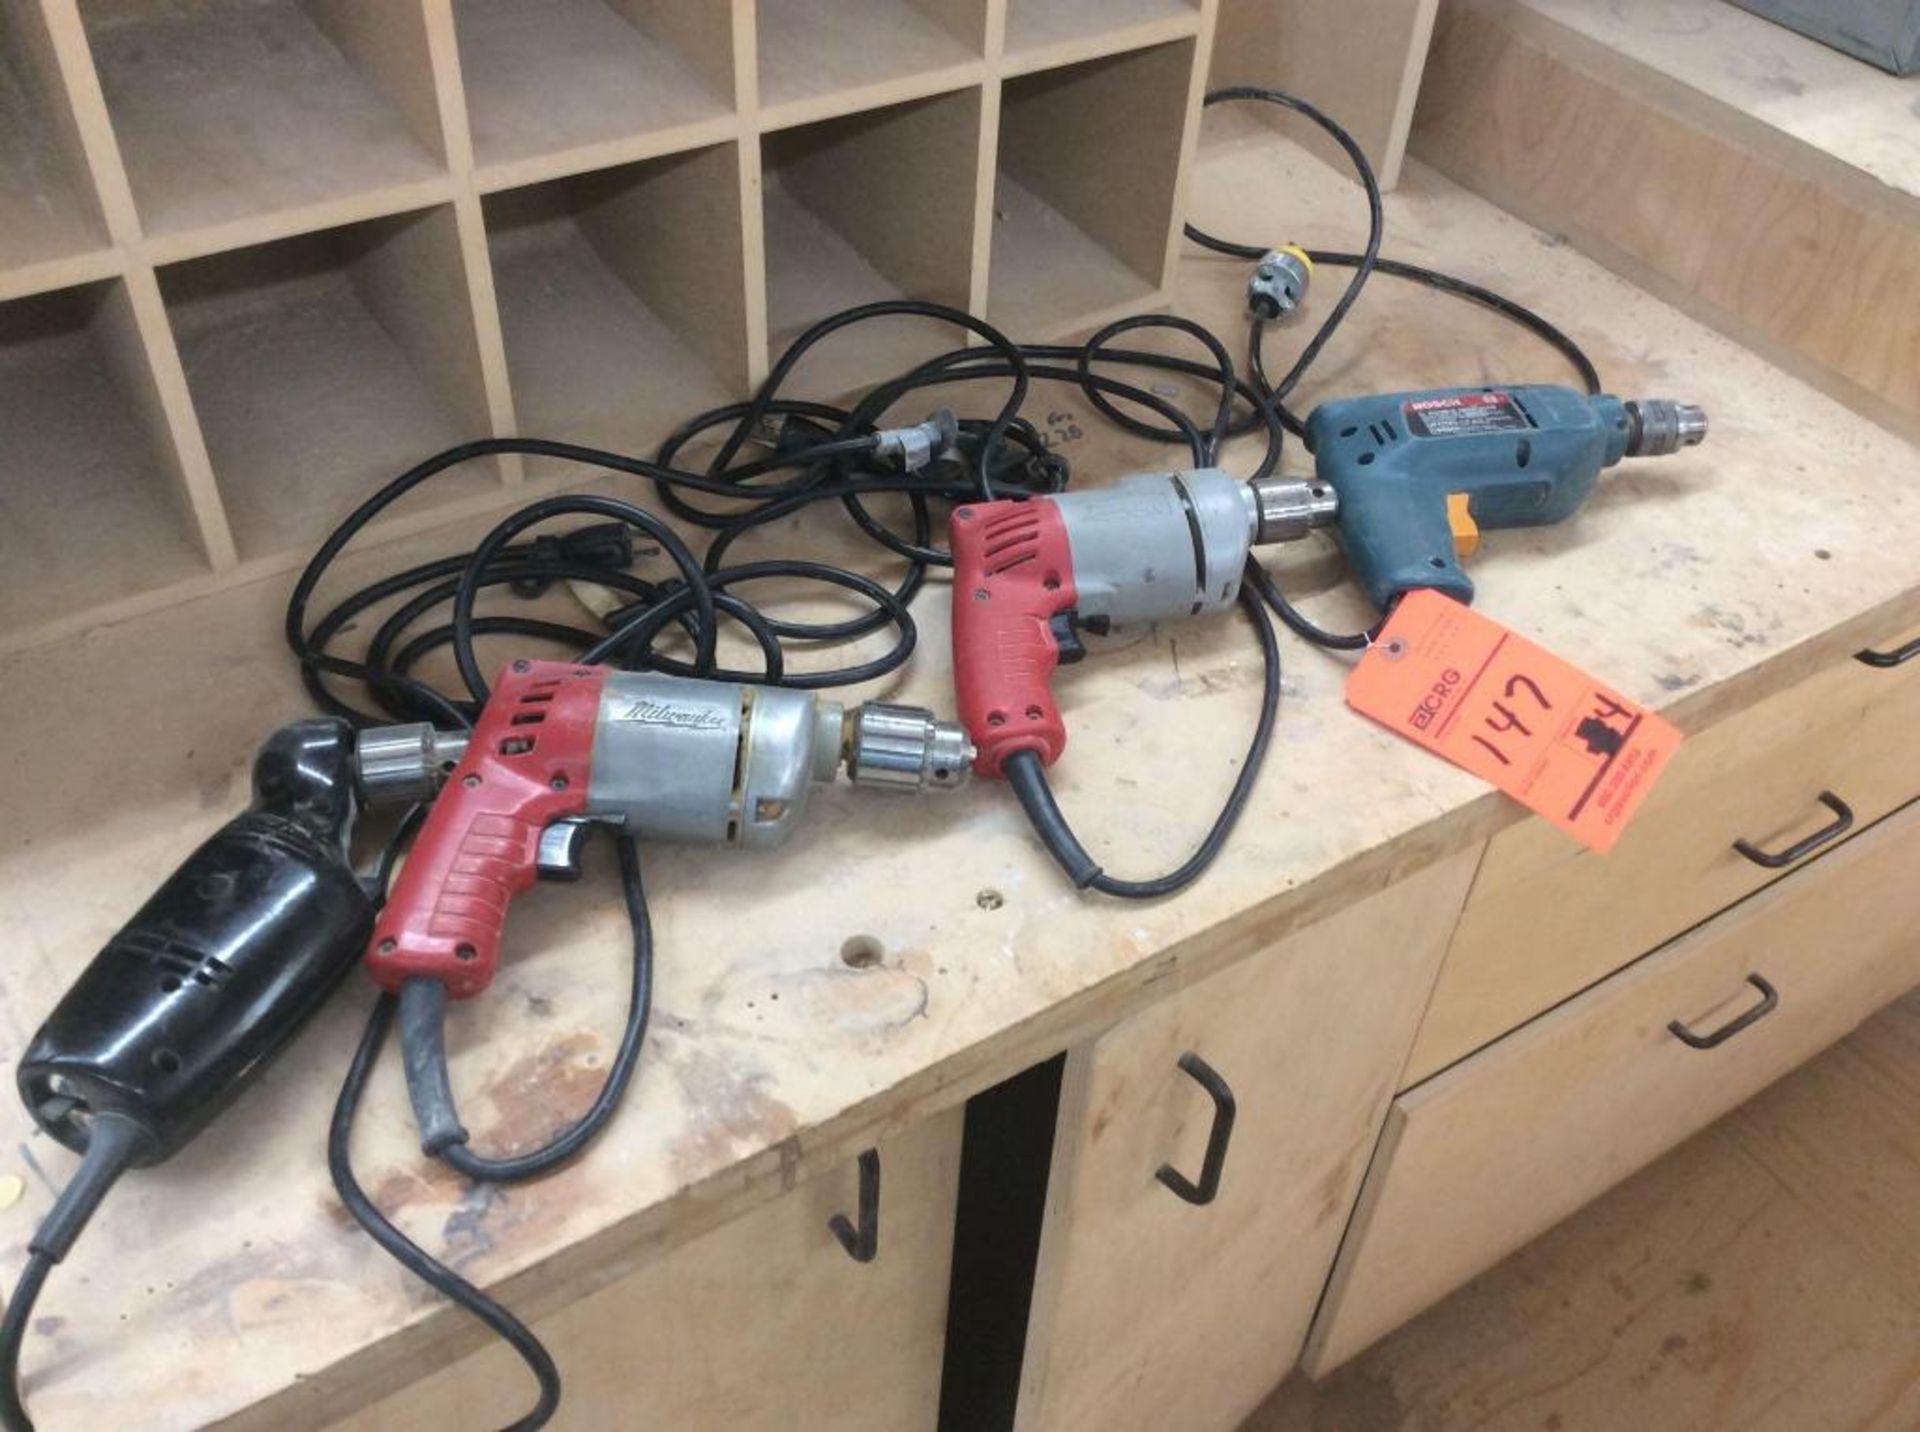 Lot of (4) asst electric drills including (2) Milwaukee 3/8" (1) Bosch double insulated mn 1158VSR 3